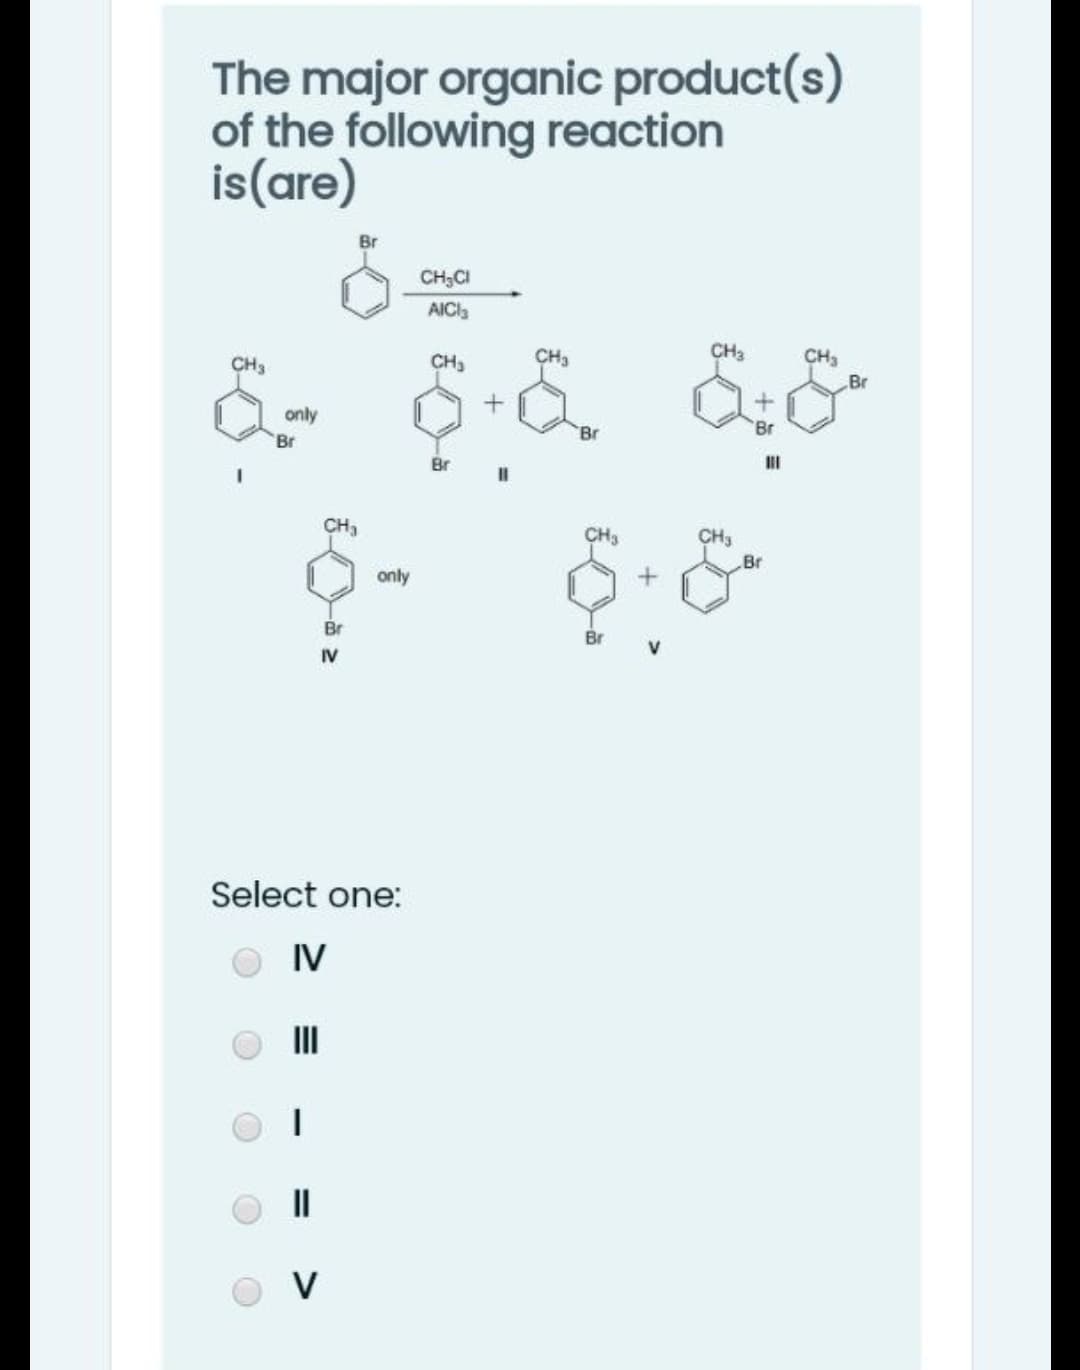 The major organic product(s)
of the following reaction
is(are)
CH;CI
AICI3
CH3
CH3
CH3
Br
CH3
CH3
only
Br
Br
Br
Br
II
CH3
CH3
Br
only
Br
Br
IV
Select one:
IV
II
V
